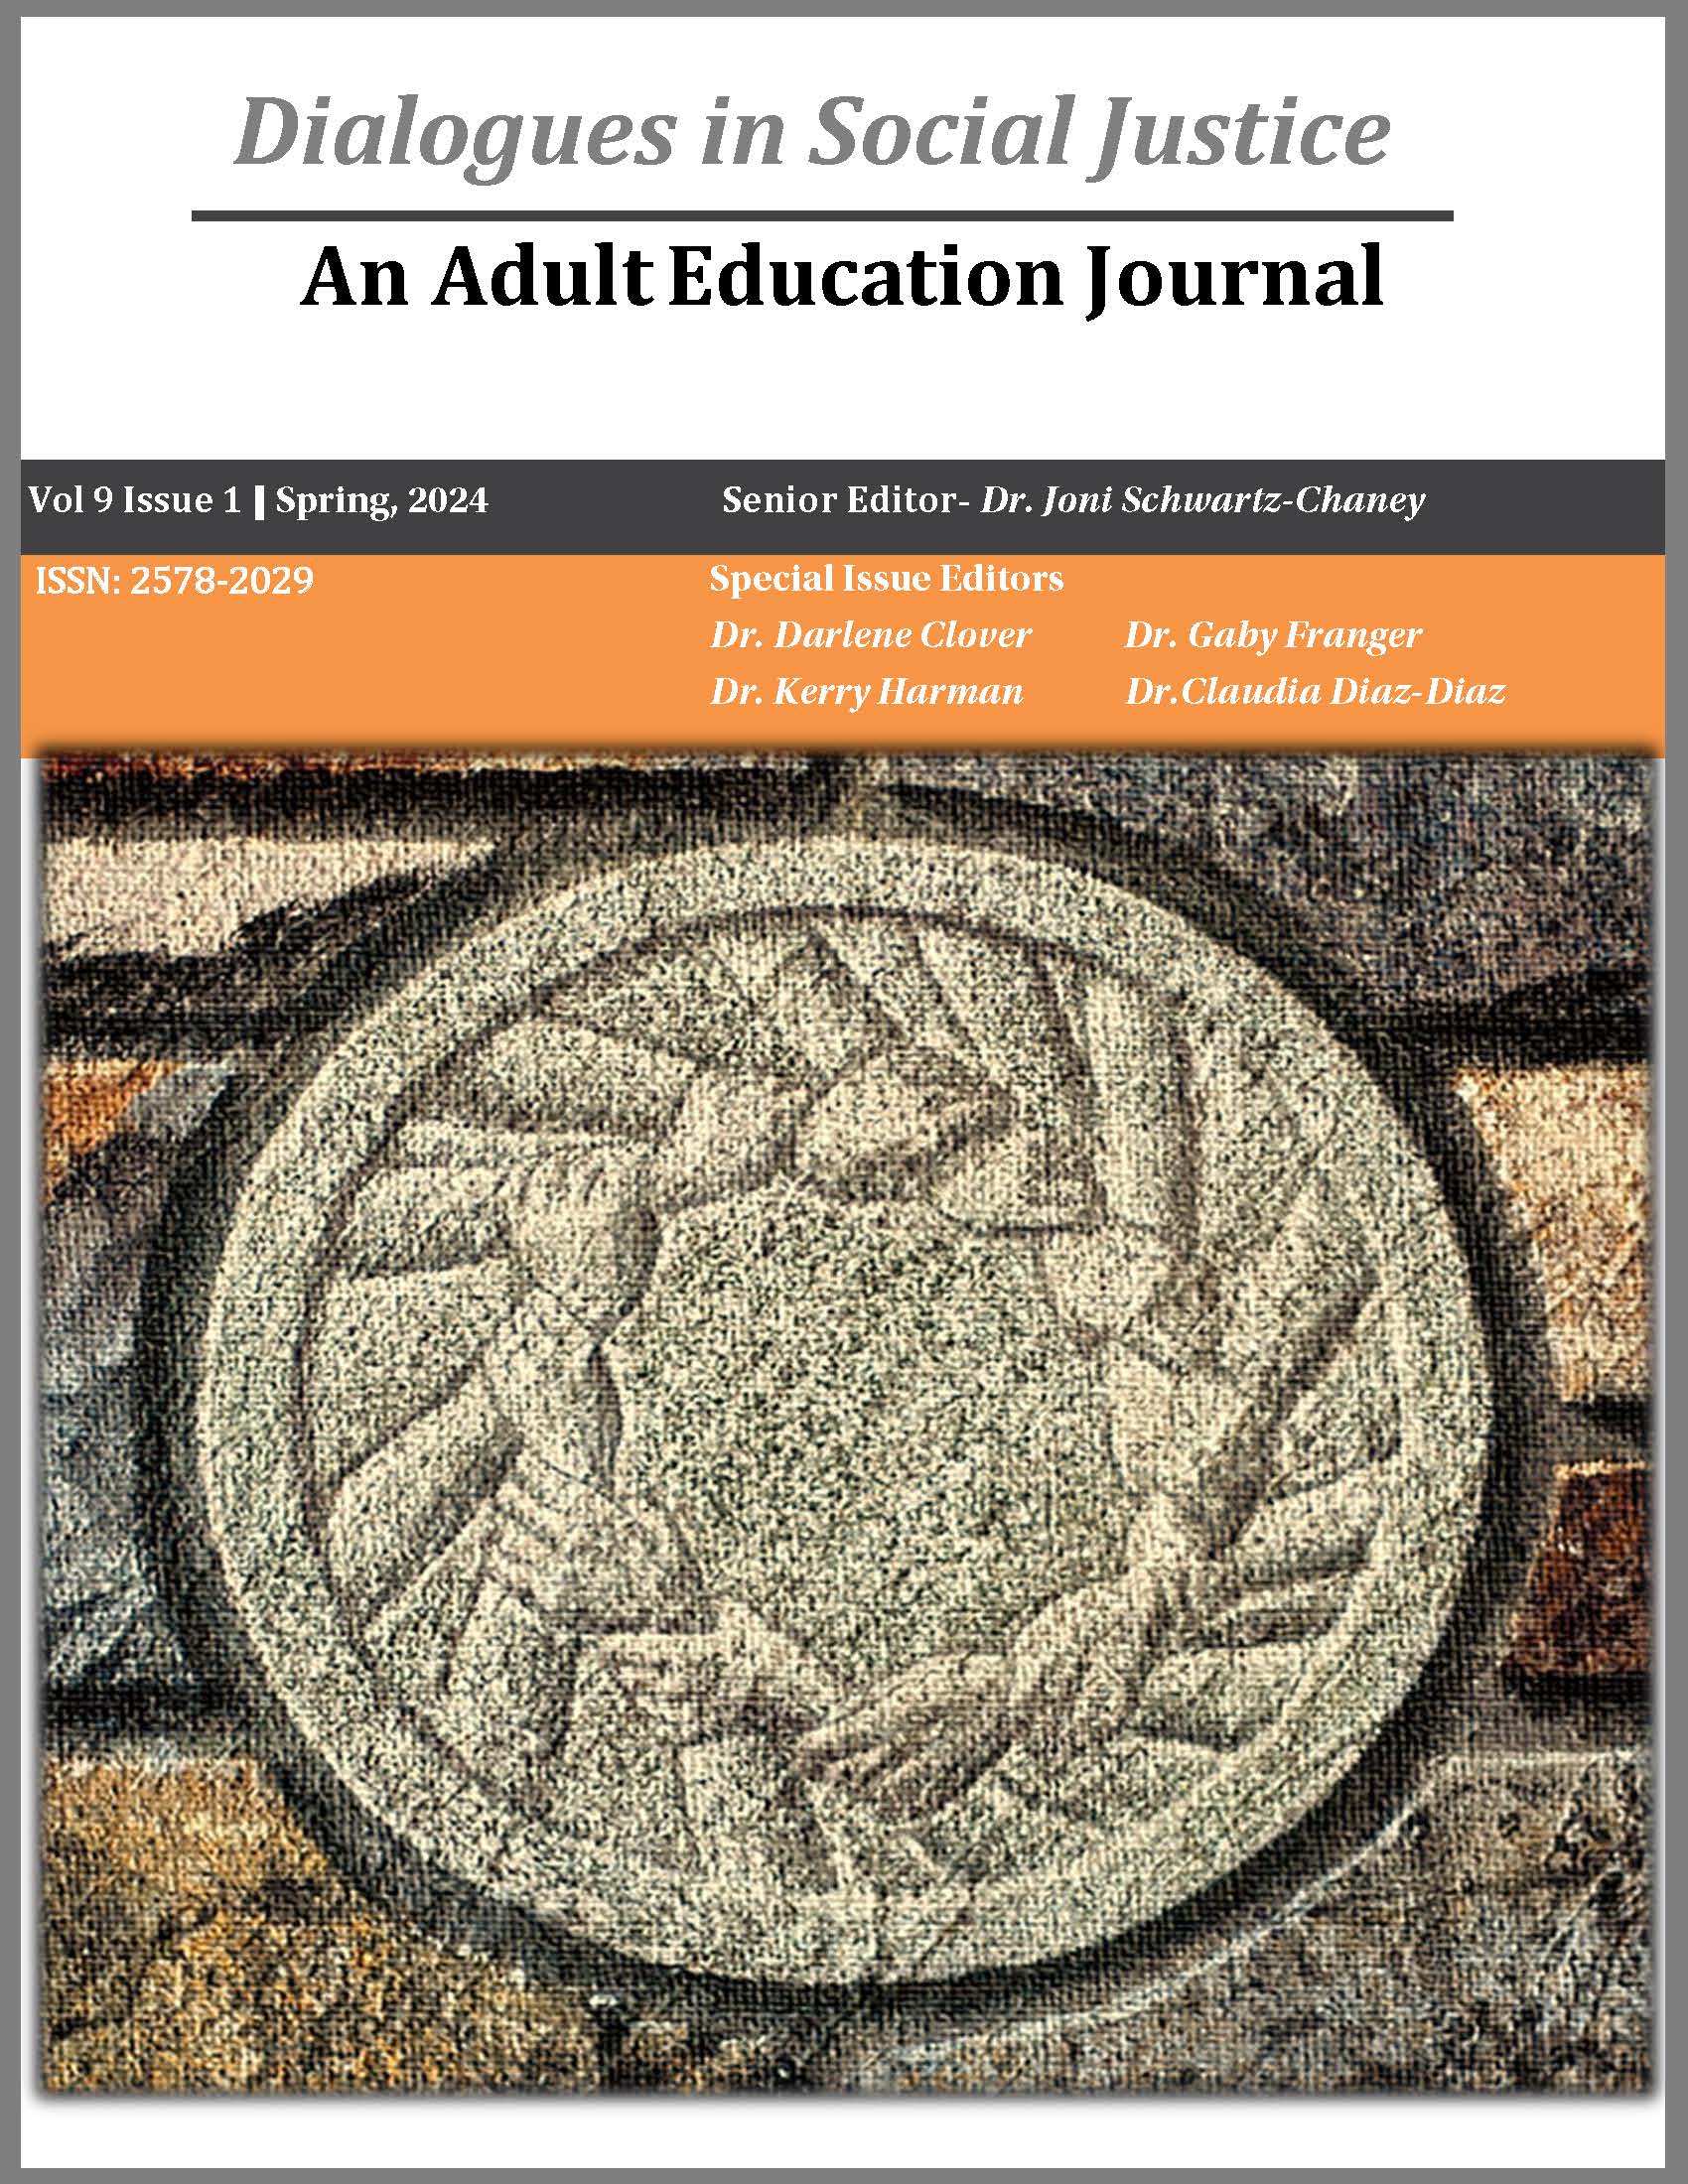 DSJ Vol. 9, Issue 1 - Feminist Adult Education, Imagination & Museums Special Issue